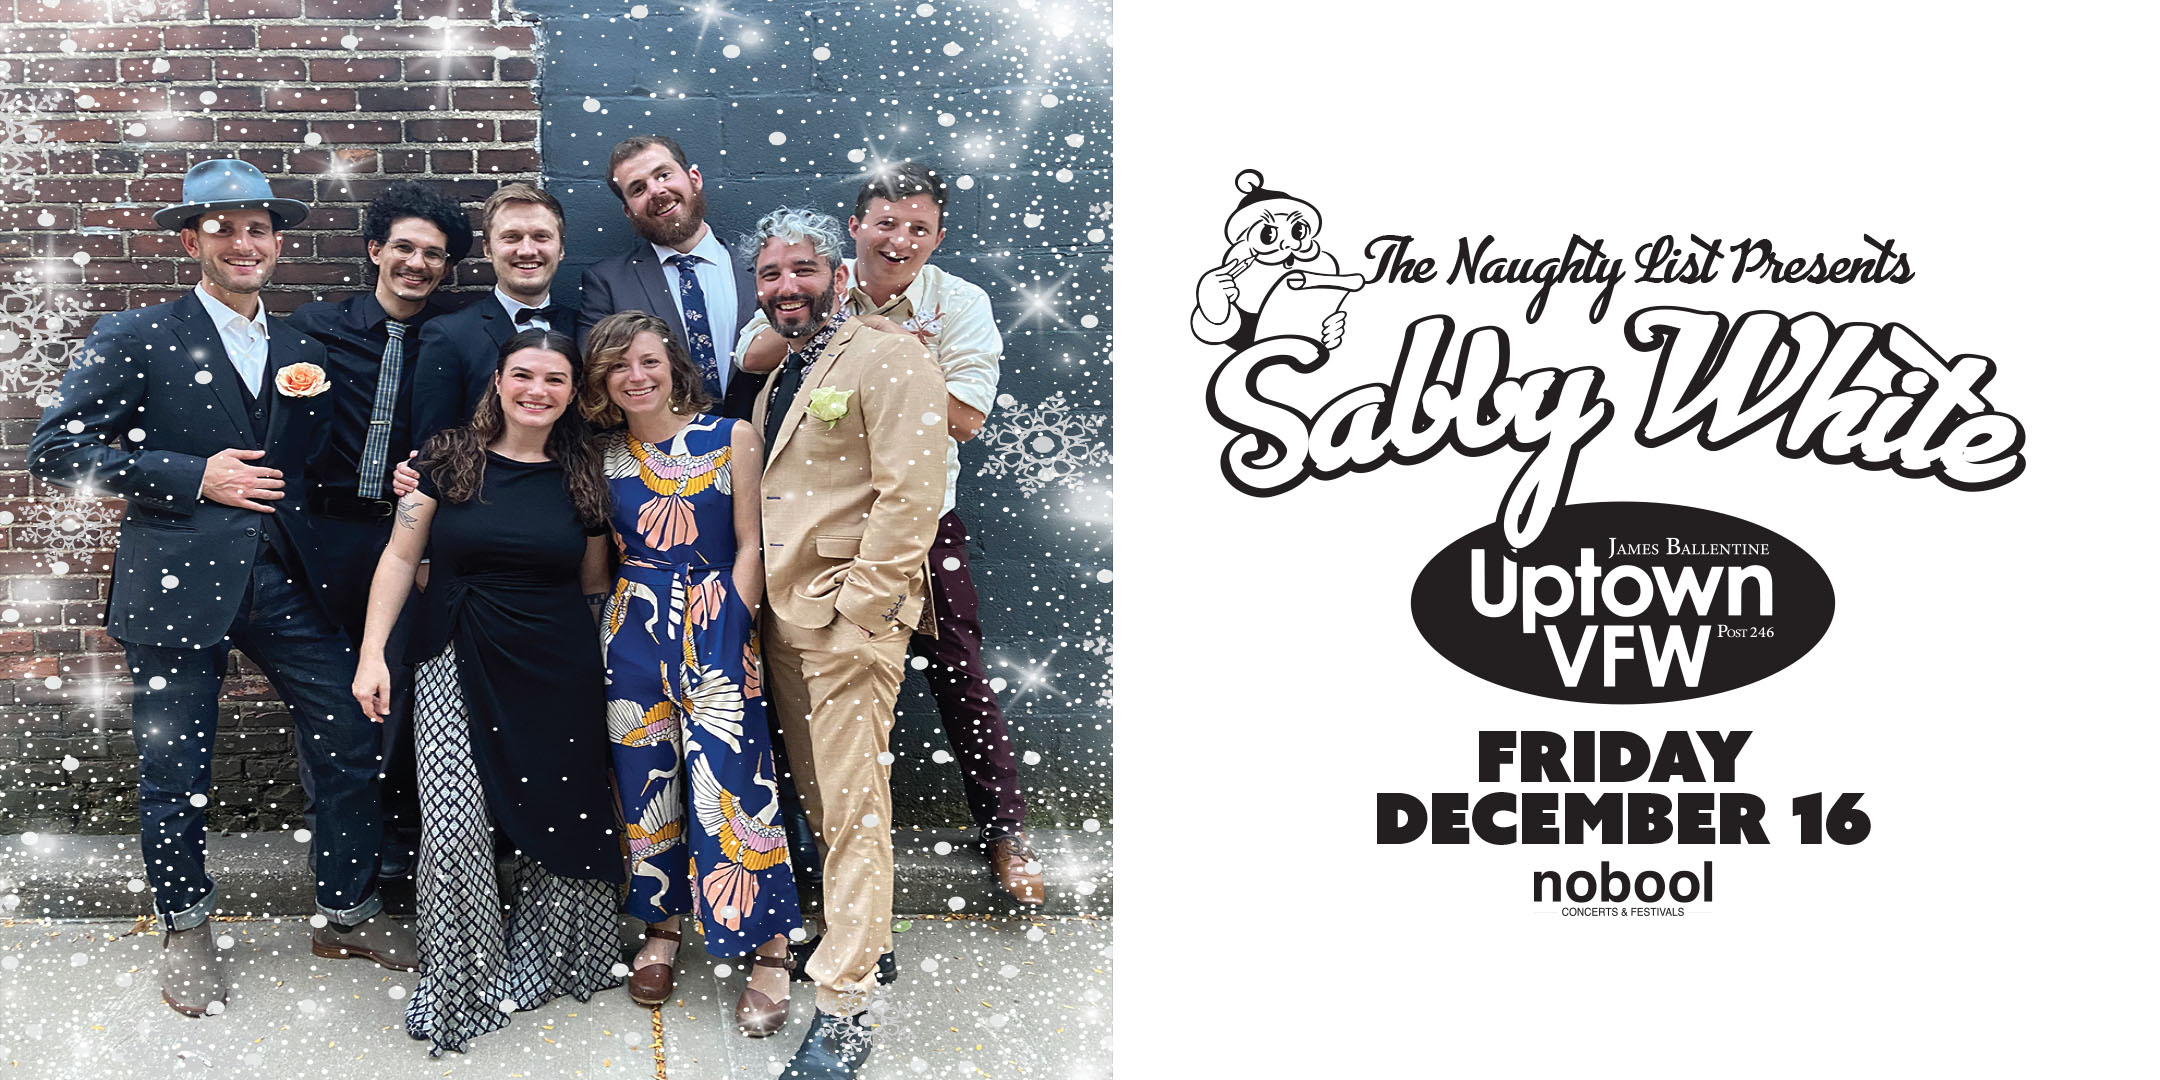 The Naughty List Presents: Sabby White Friday, December 16, 2022 James Ballentine "Uptown" VFW Post 246 2916 Lyndale Ave S Mpls Doors 8:30pm :: Music 9pm :: 21+ GA: $5 ADV / $10 DOS  NO REFUNDS